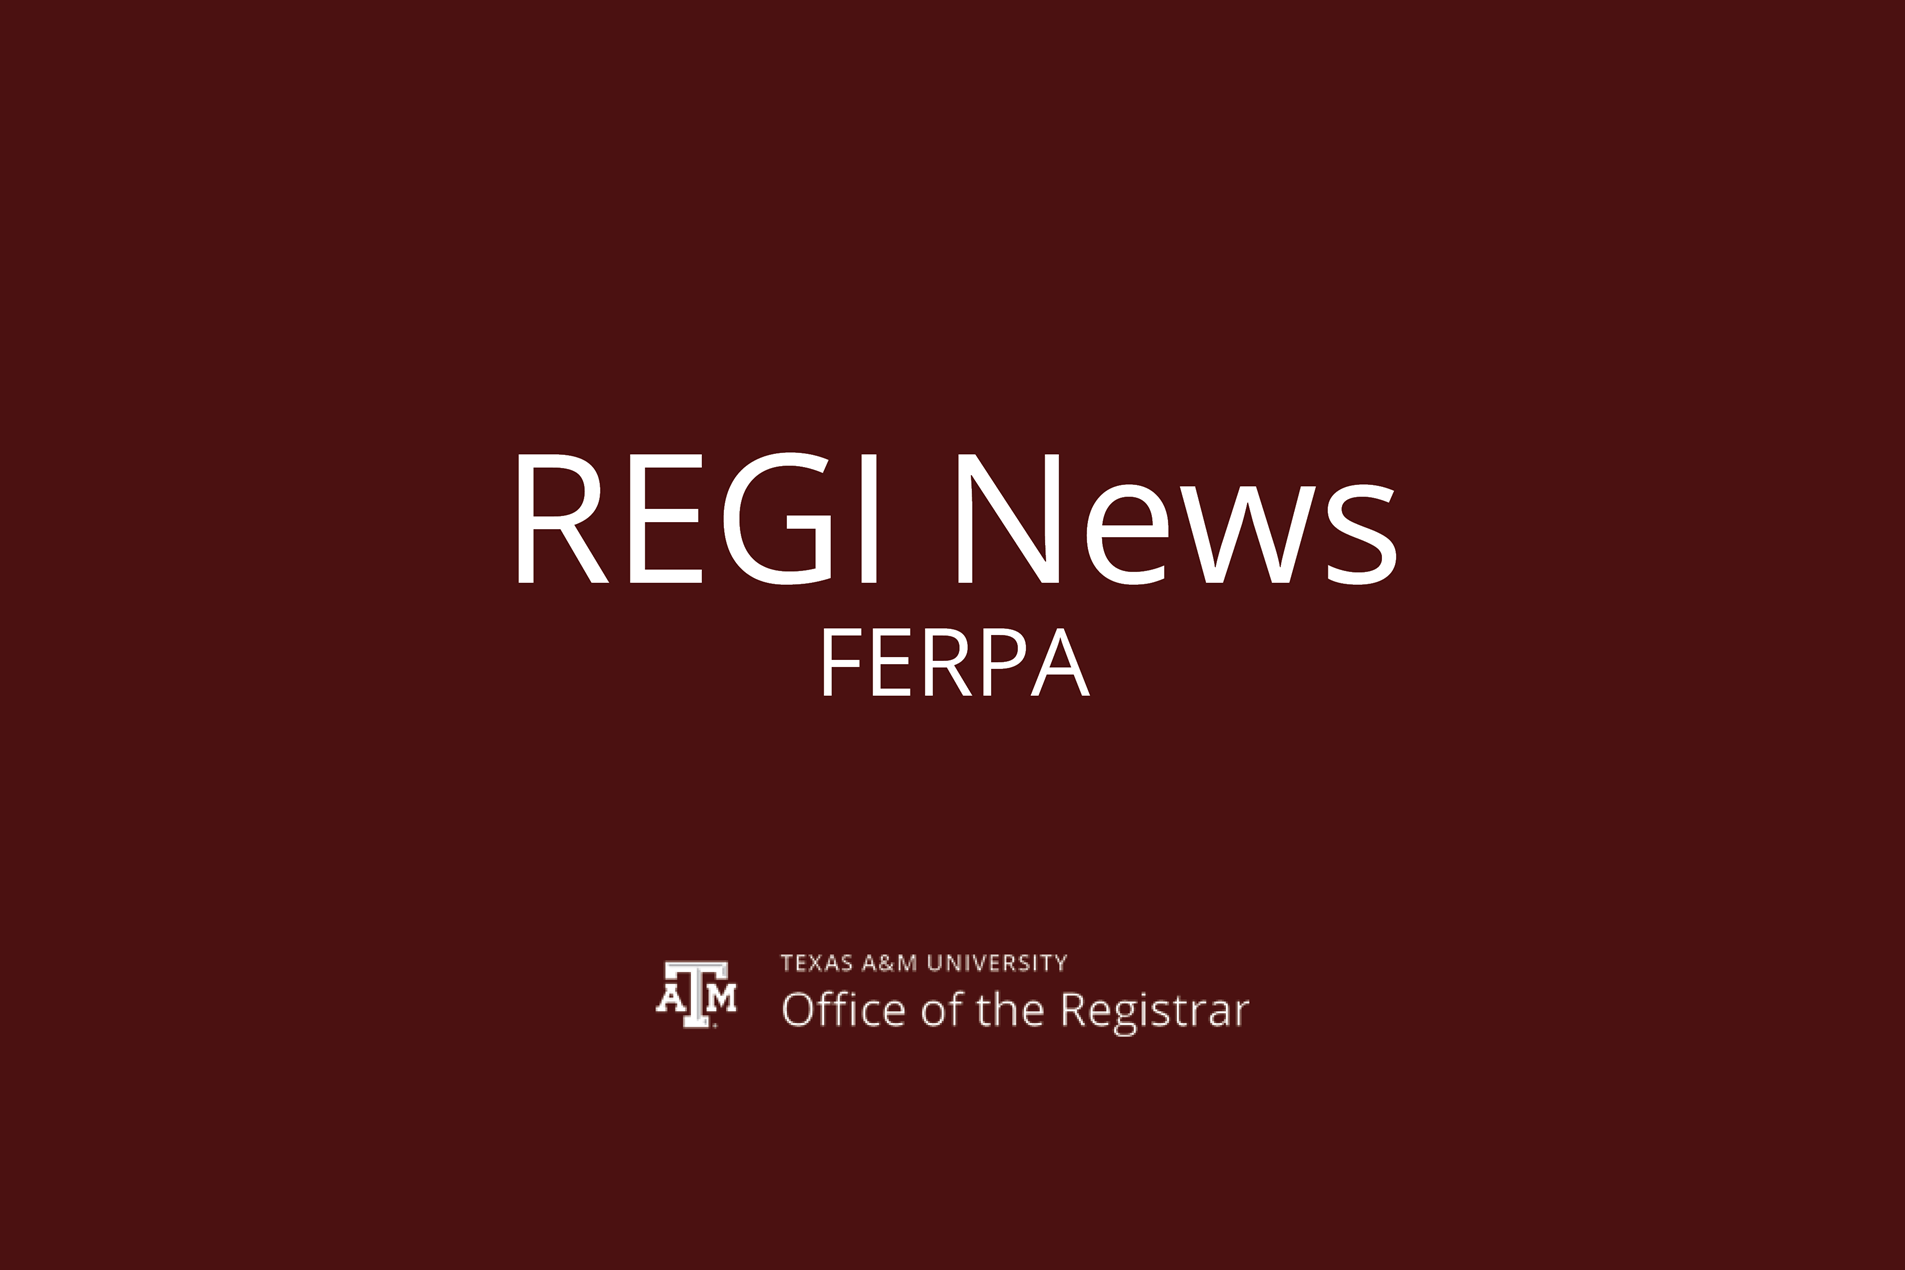 Friday Fun with FERPA, March 10, 2023 - Designation as a School Official